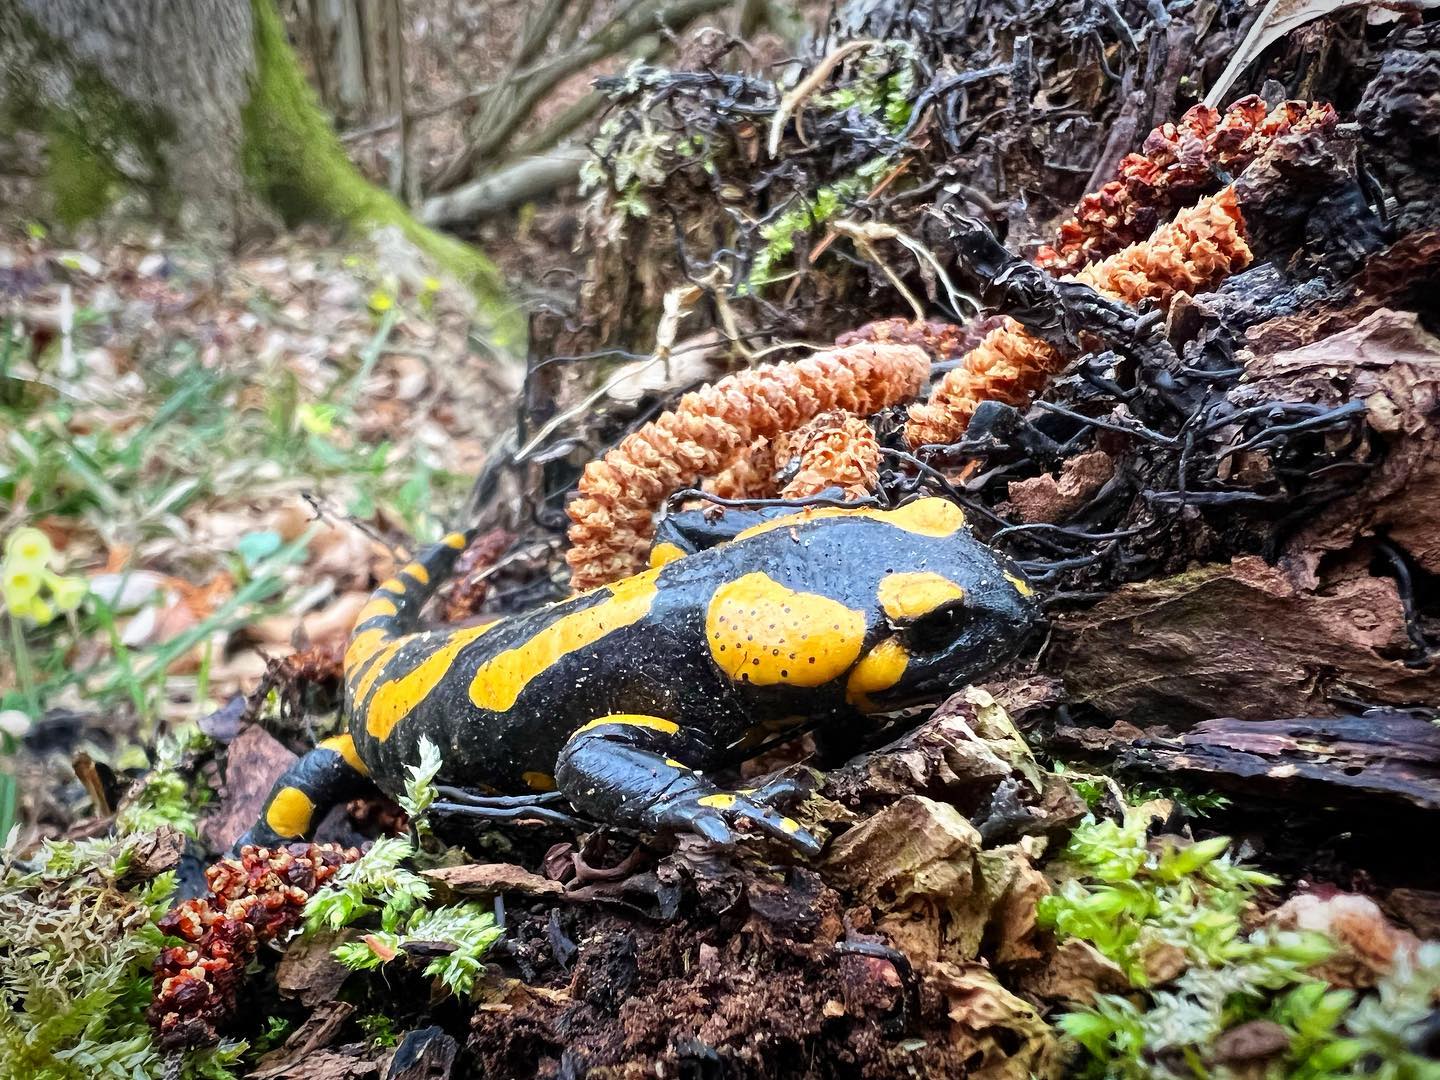 #spring is here! I just met this amazing #creature in the #forest #firesalamander #salamander #mountains #moravia #nature #carpathians #animals #czechrepublic #mlok #iphone13pro #macro #macrophotography